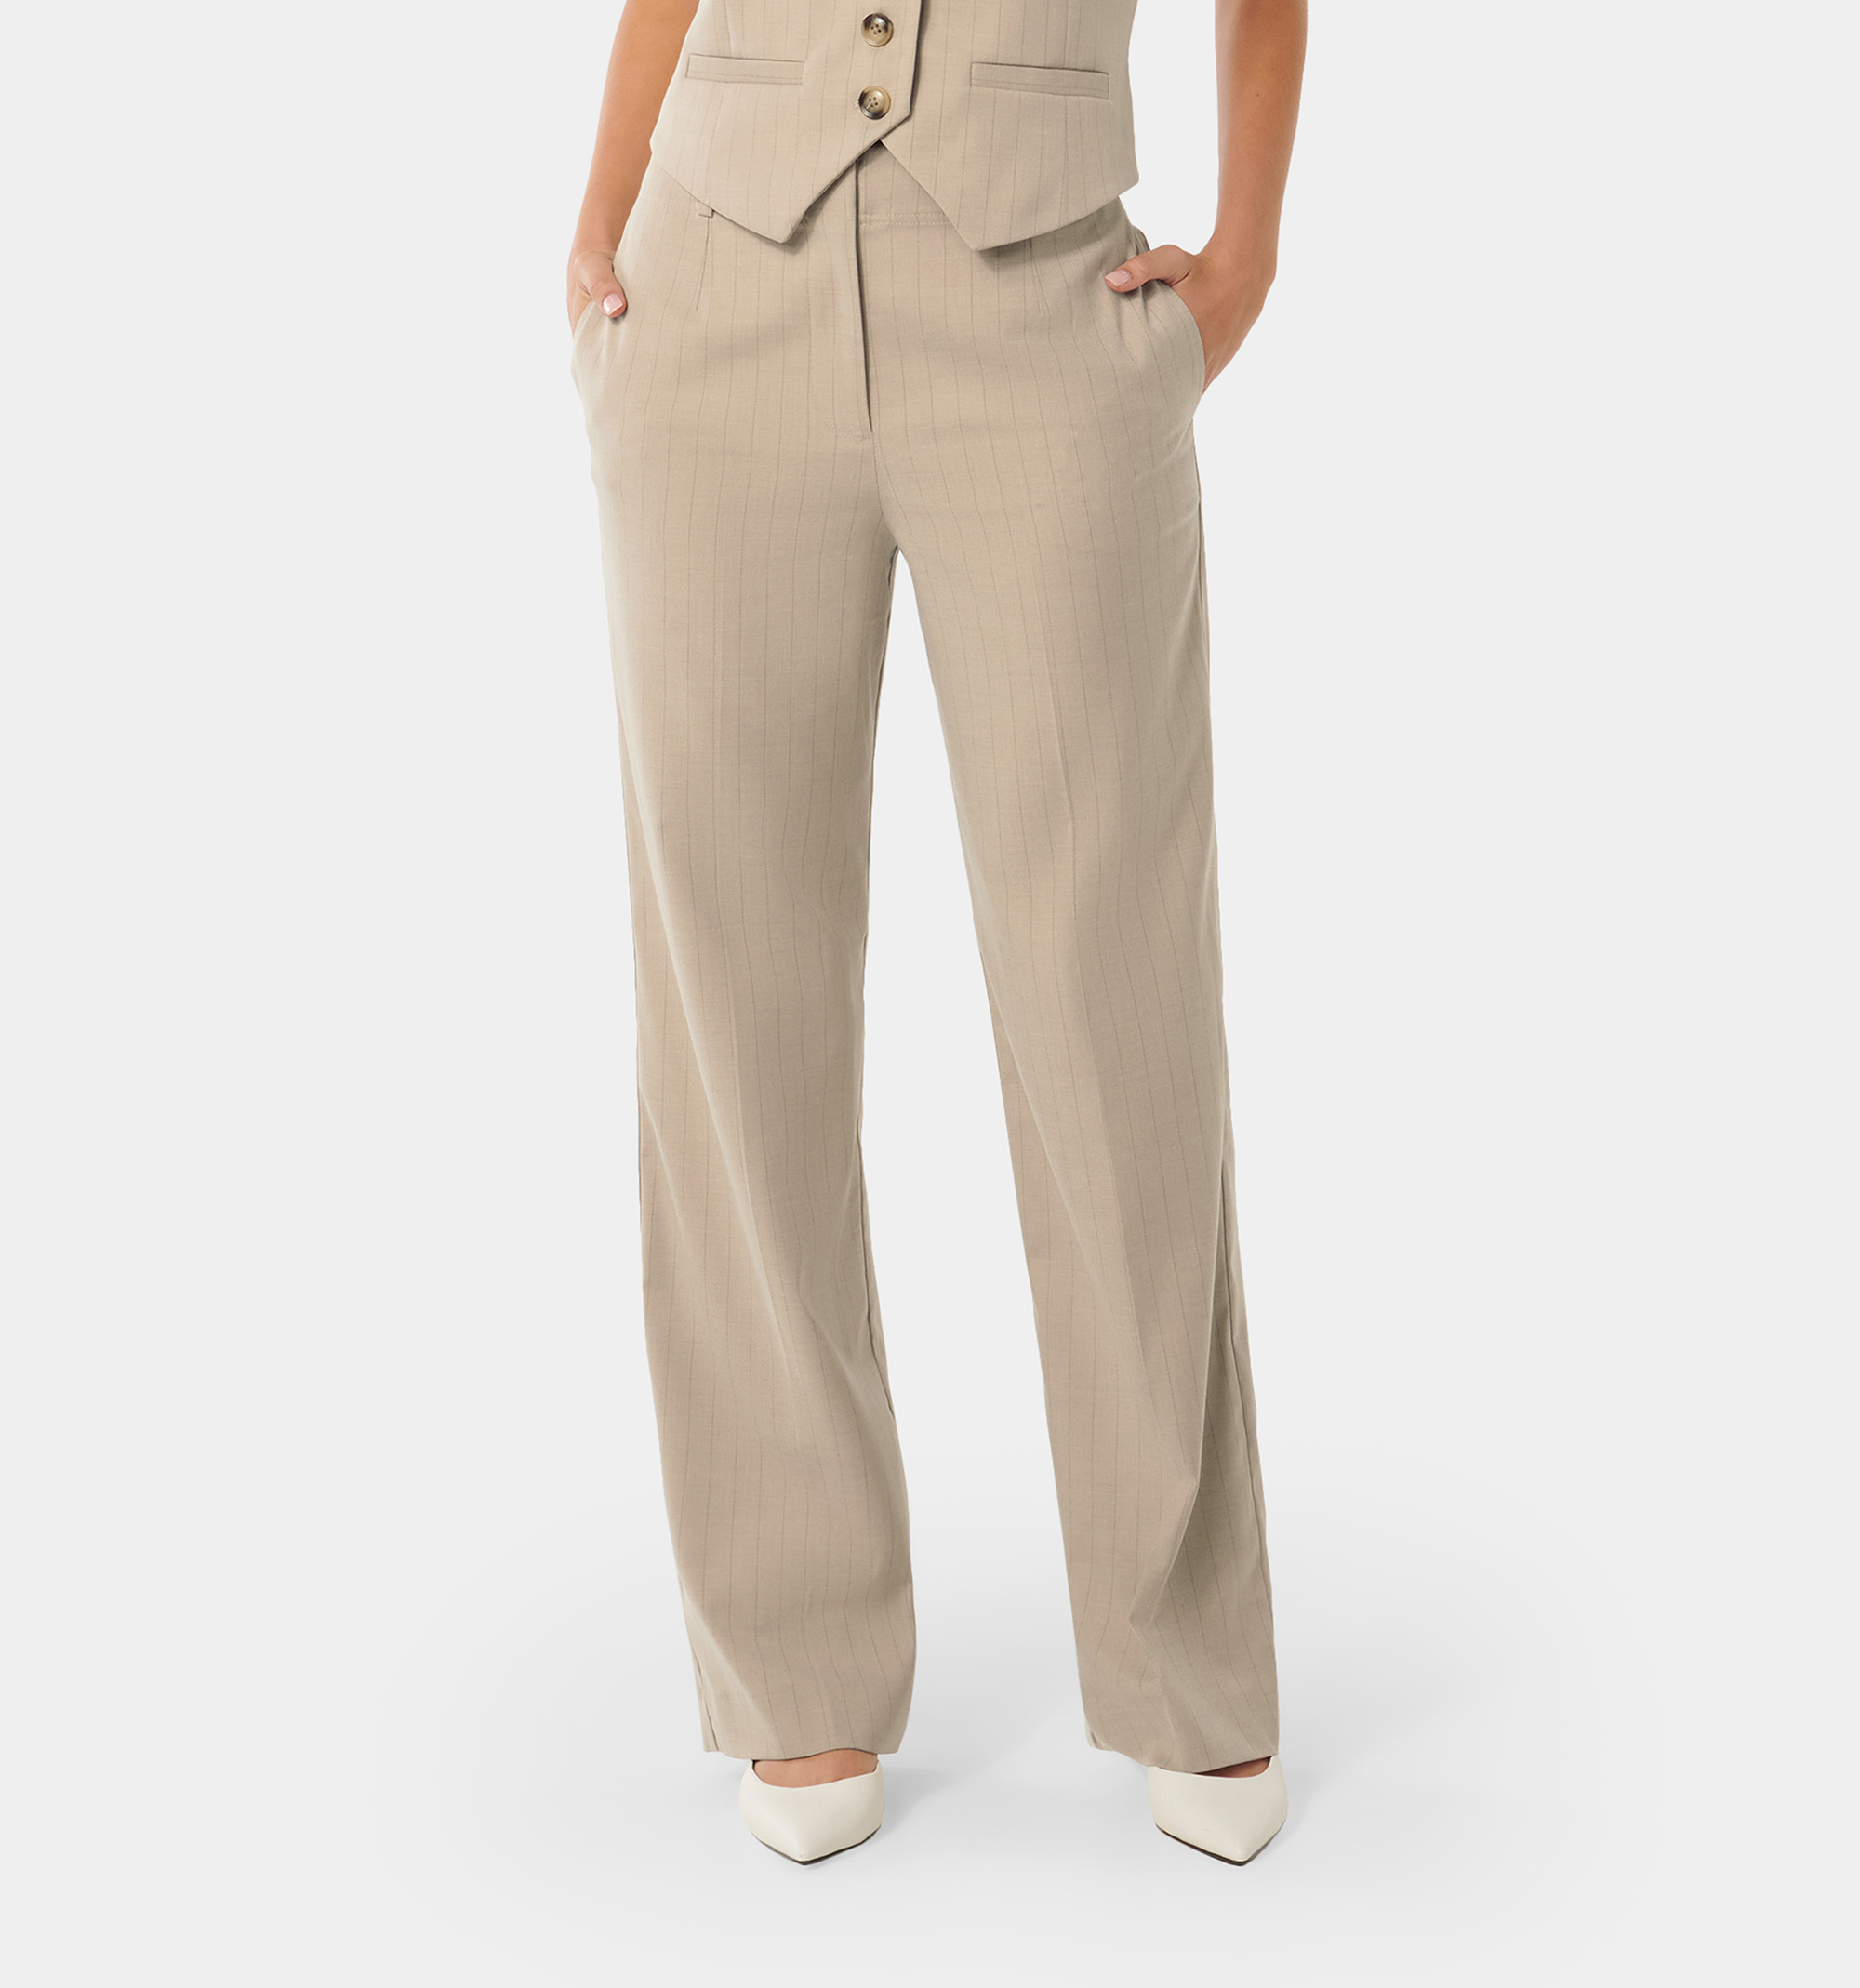 Forever New Emmie Straight Leg Pant in Pinstripe Suit